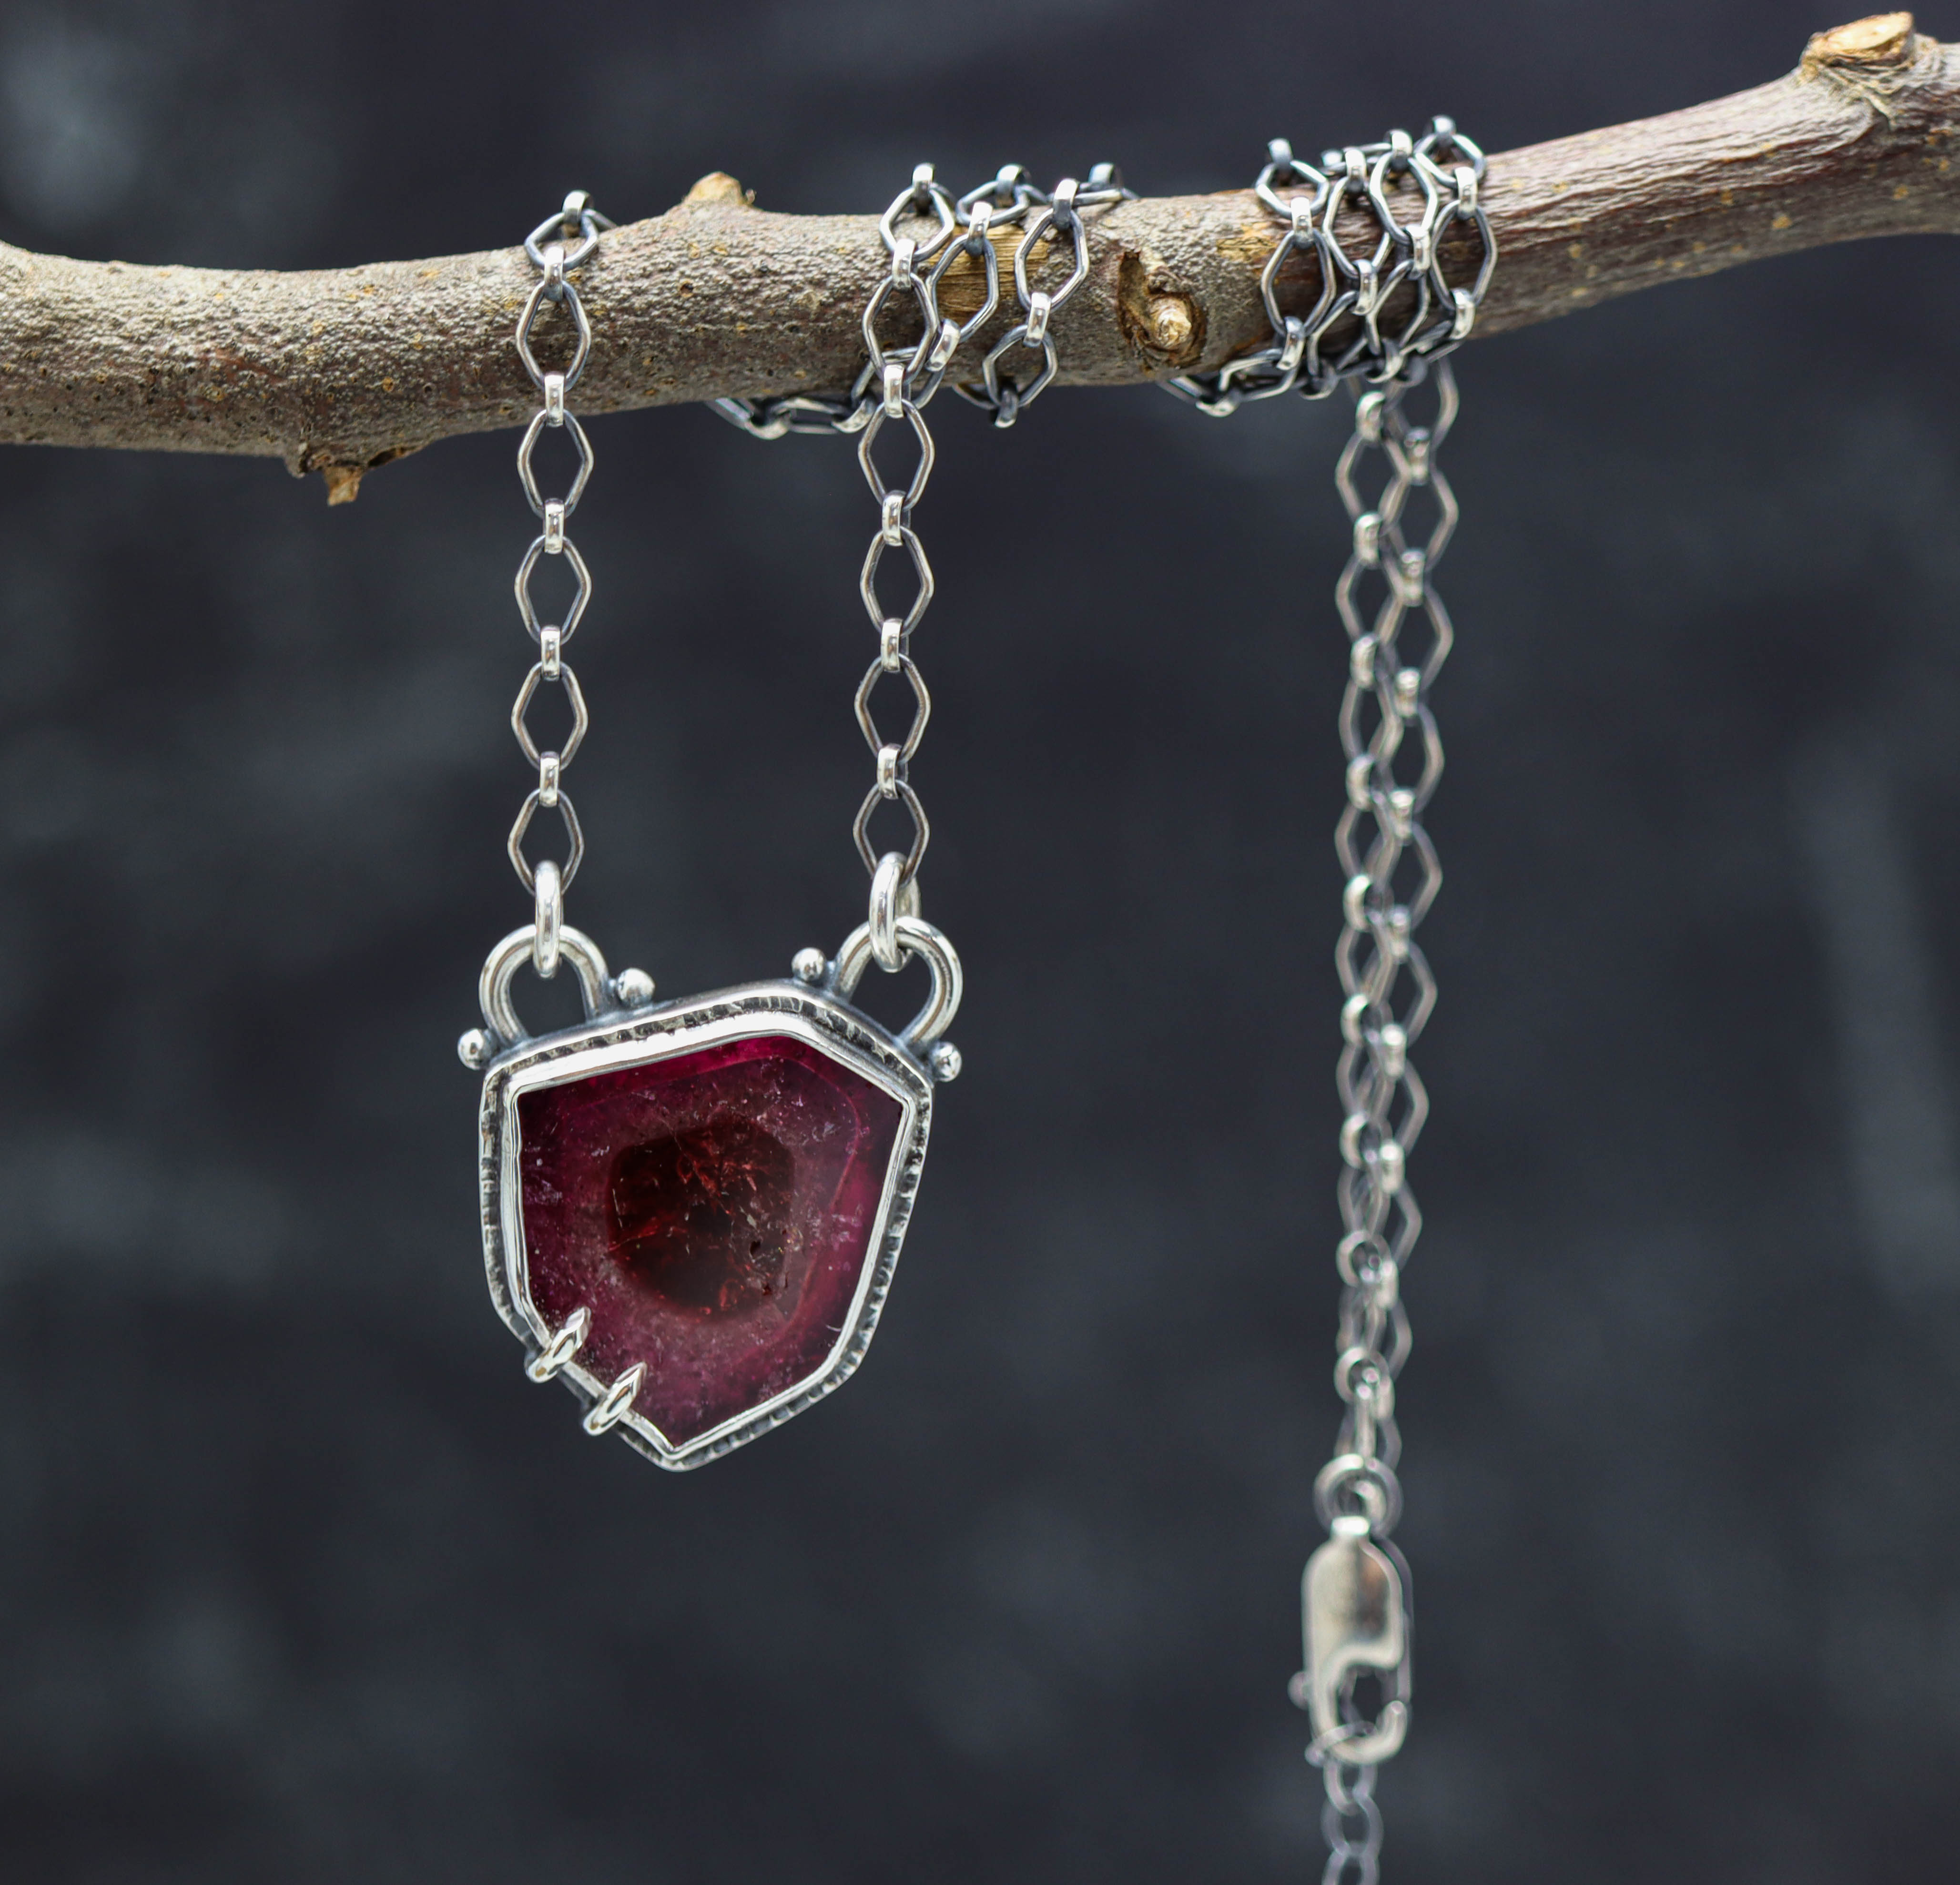 Raw Pink Tourmaline Slice Pendant Necklace Sterling Silver